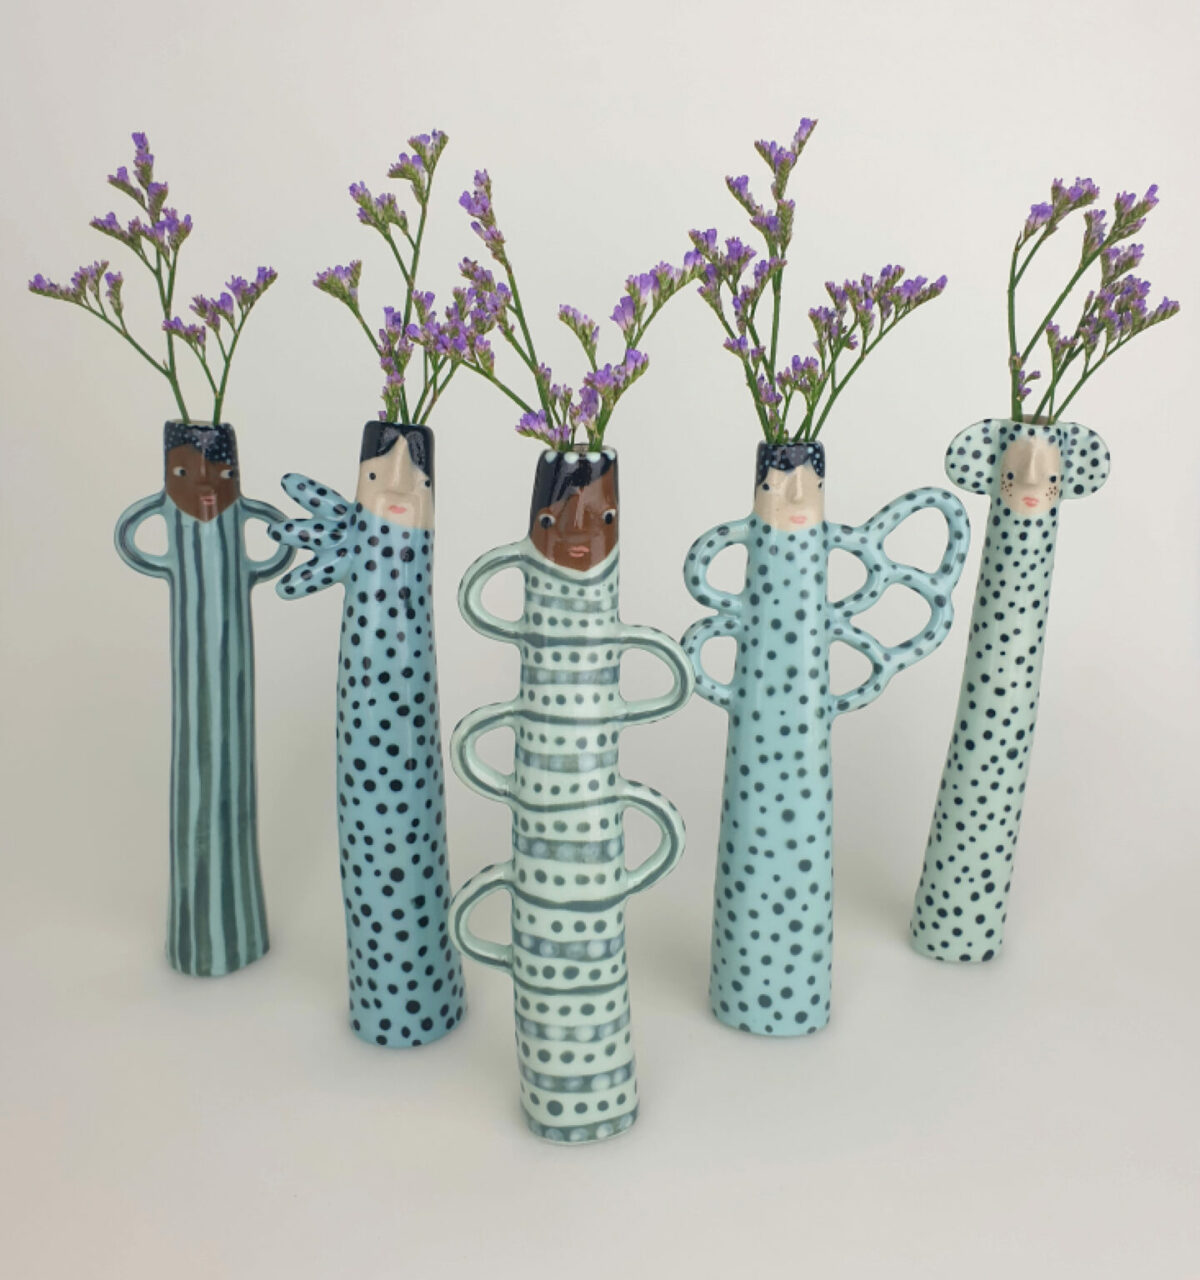 Lovely Porcelain Pieces Patterned With Quirky Cartoon Like Figures By Sandra Apperloo 1